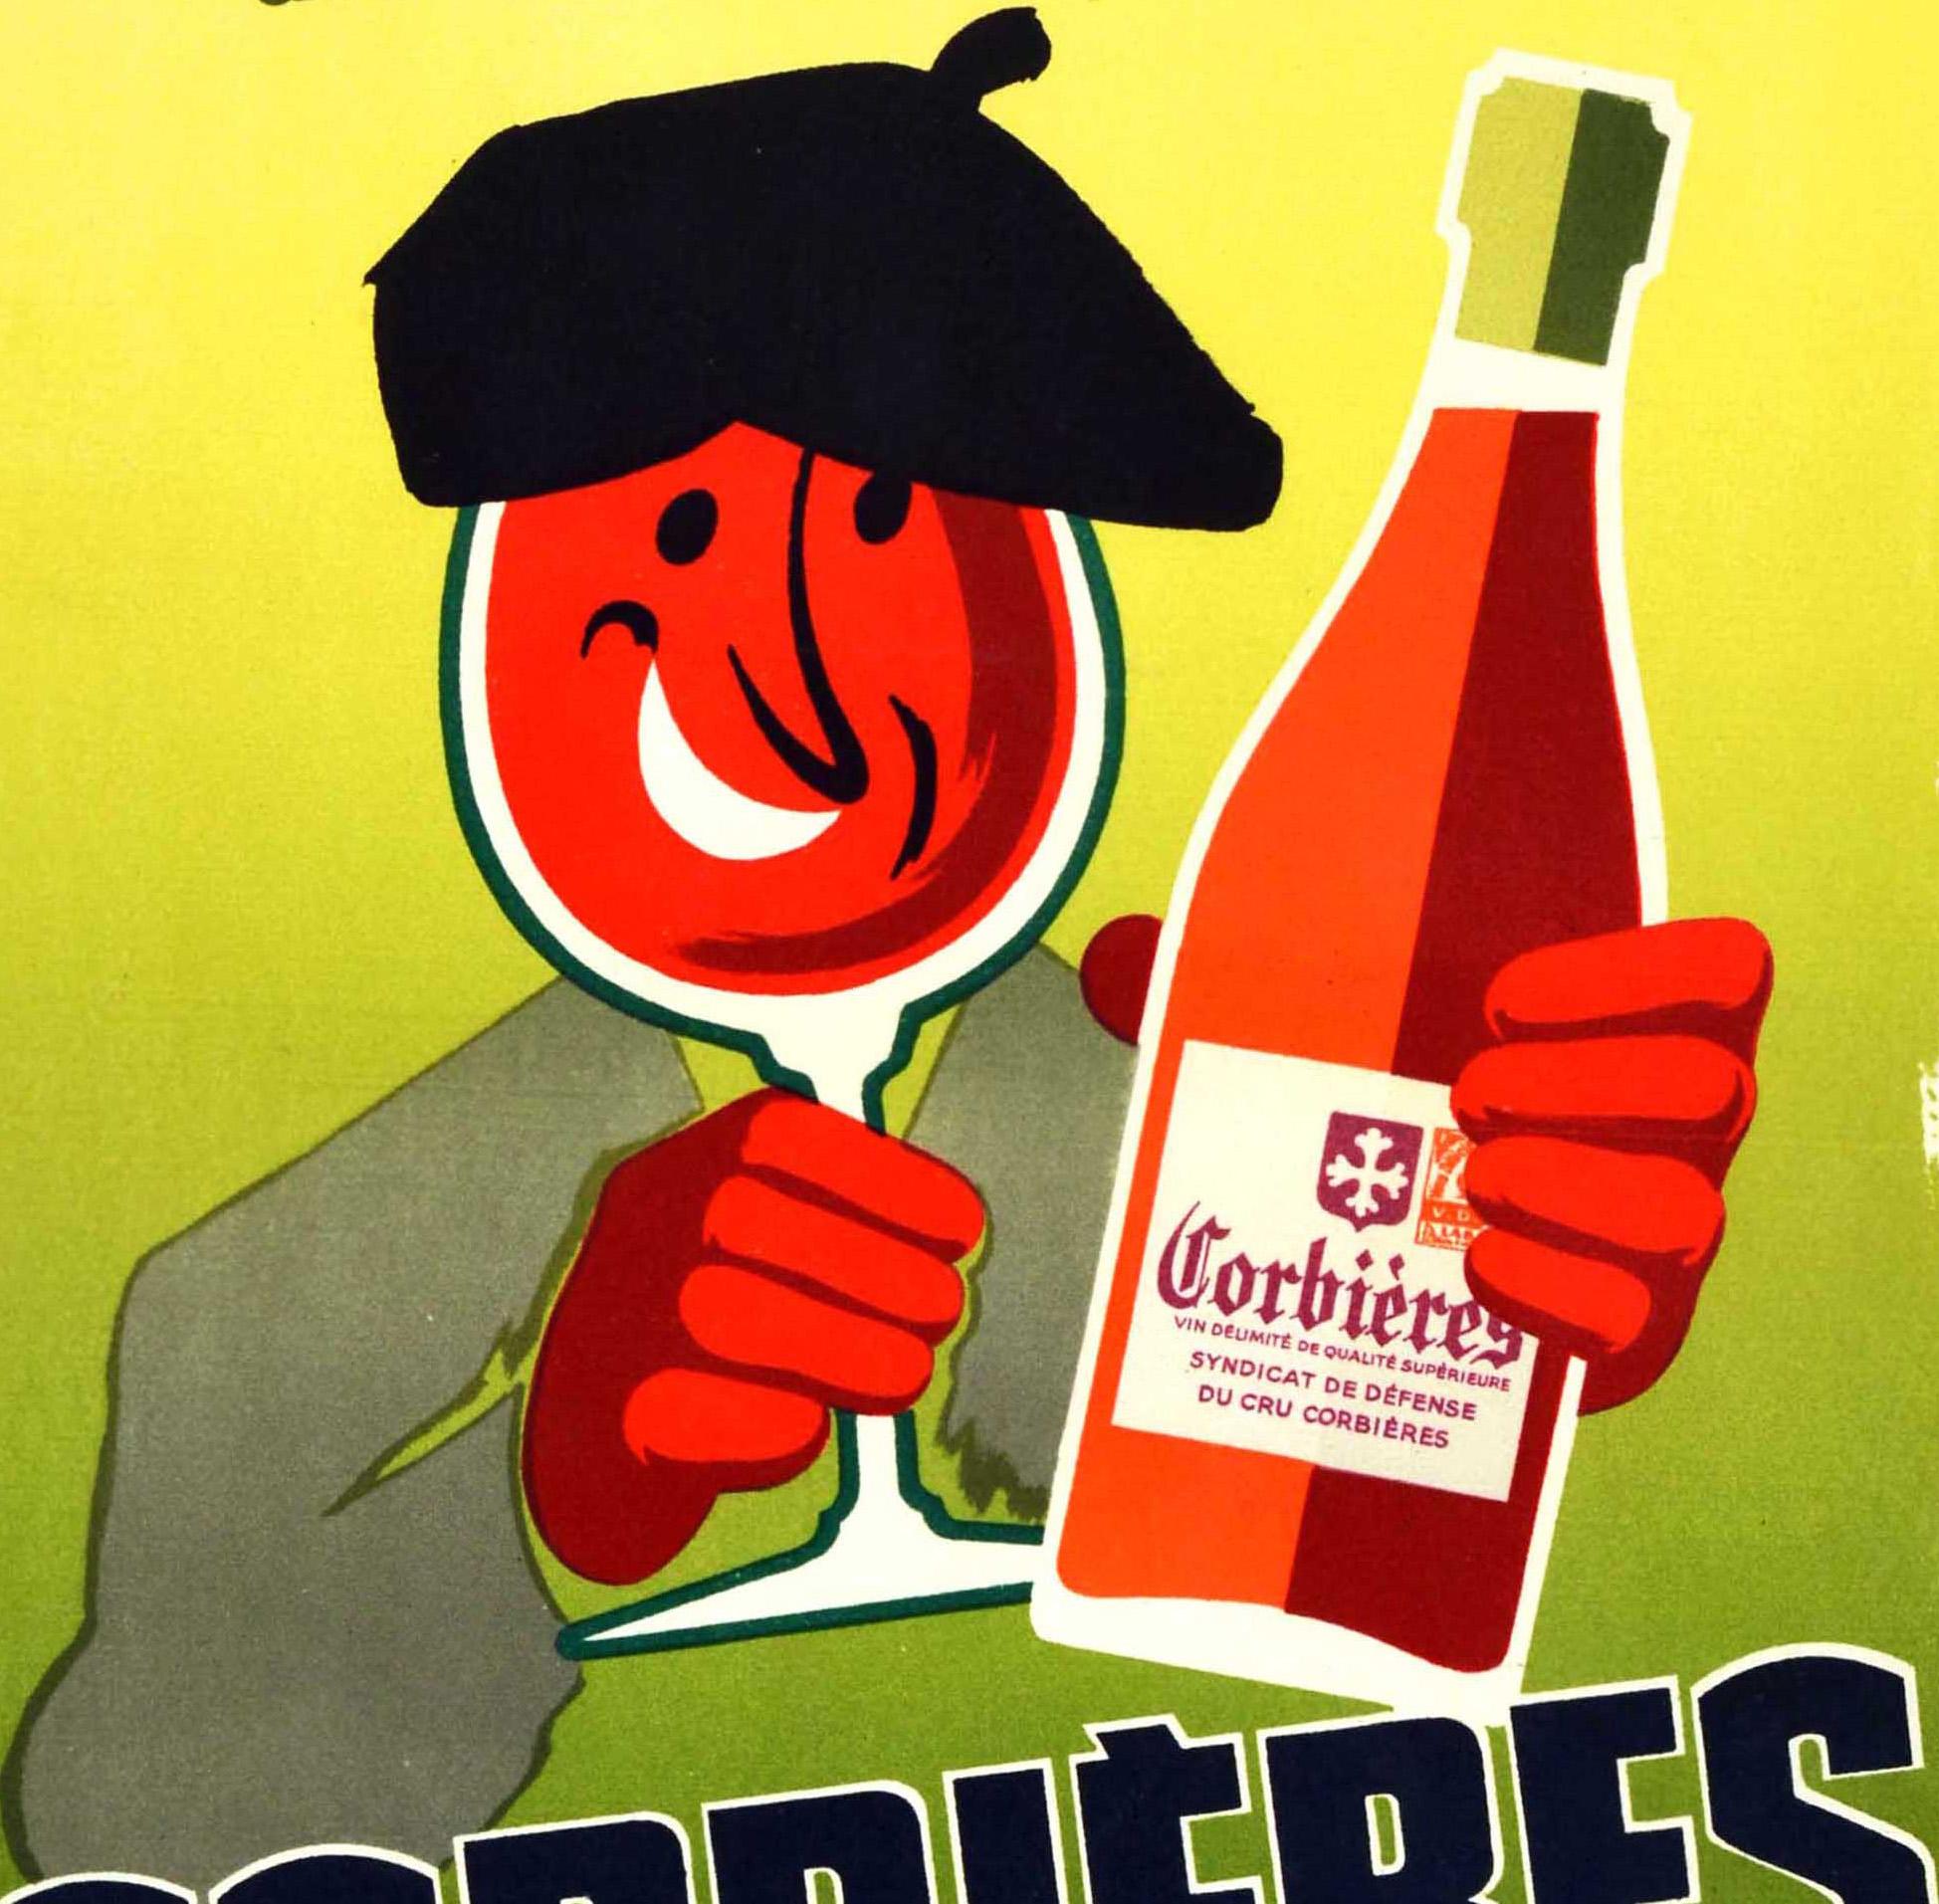 Original Vintage Drink Poster Corbieres AOC Wine France Languedoc Roussillon - Print by Unknown